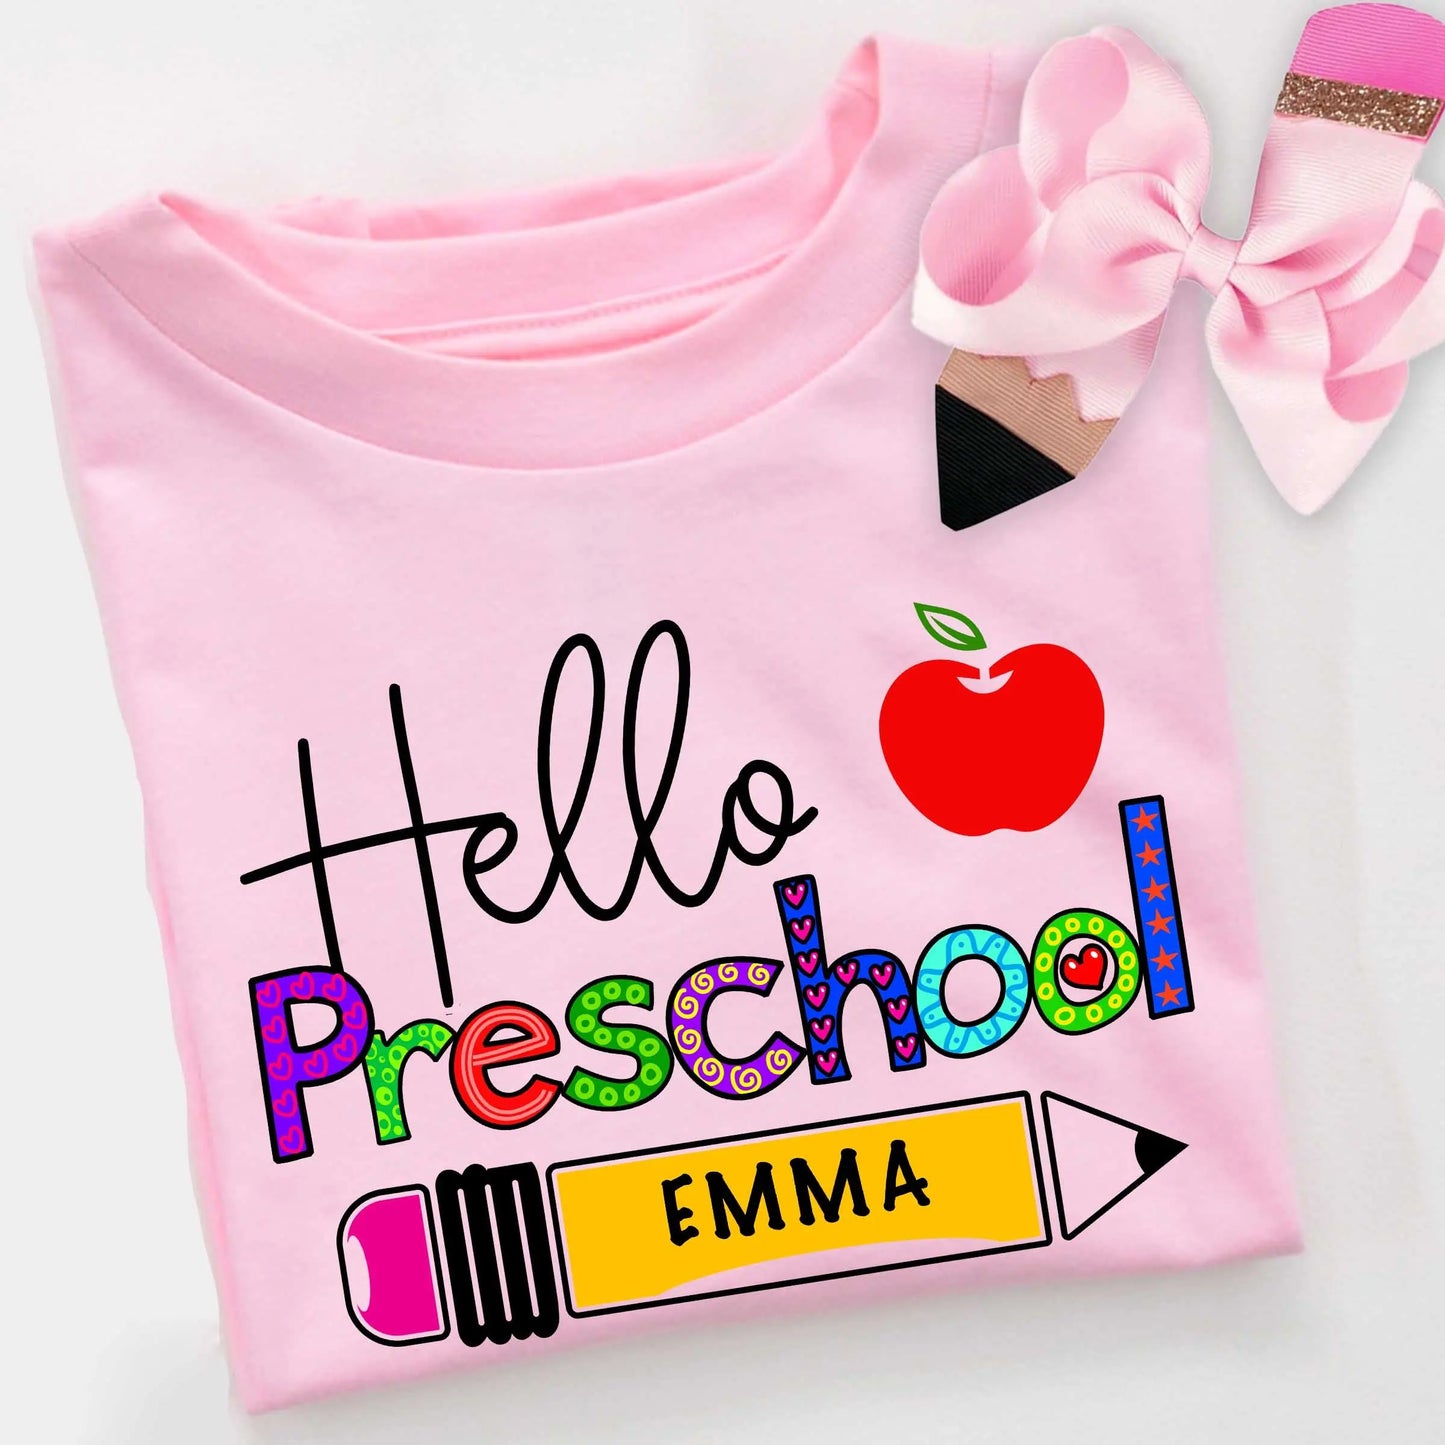 Back to School Personalized Tshirt, First Day of School Shirt, Pre-K, Preschool Shirt Printify